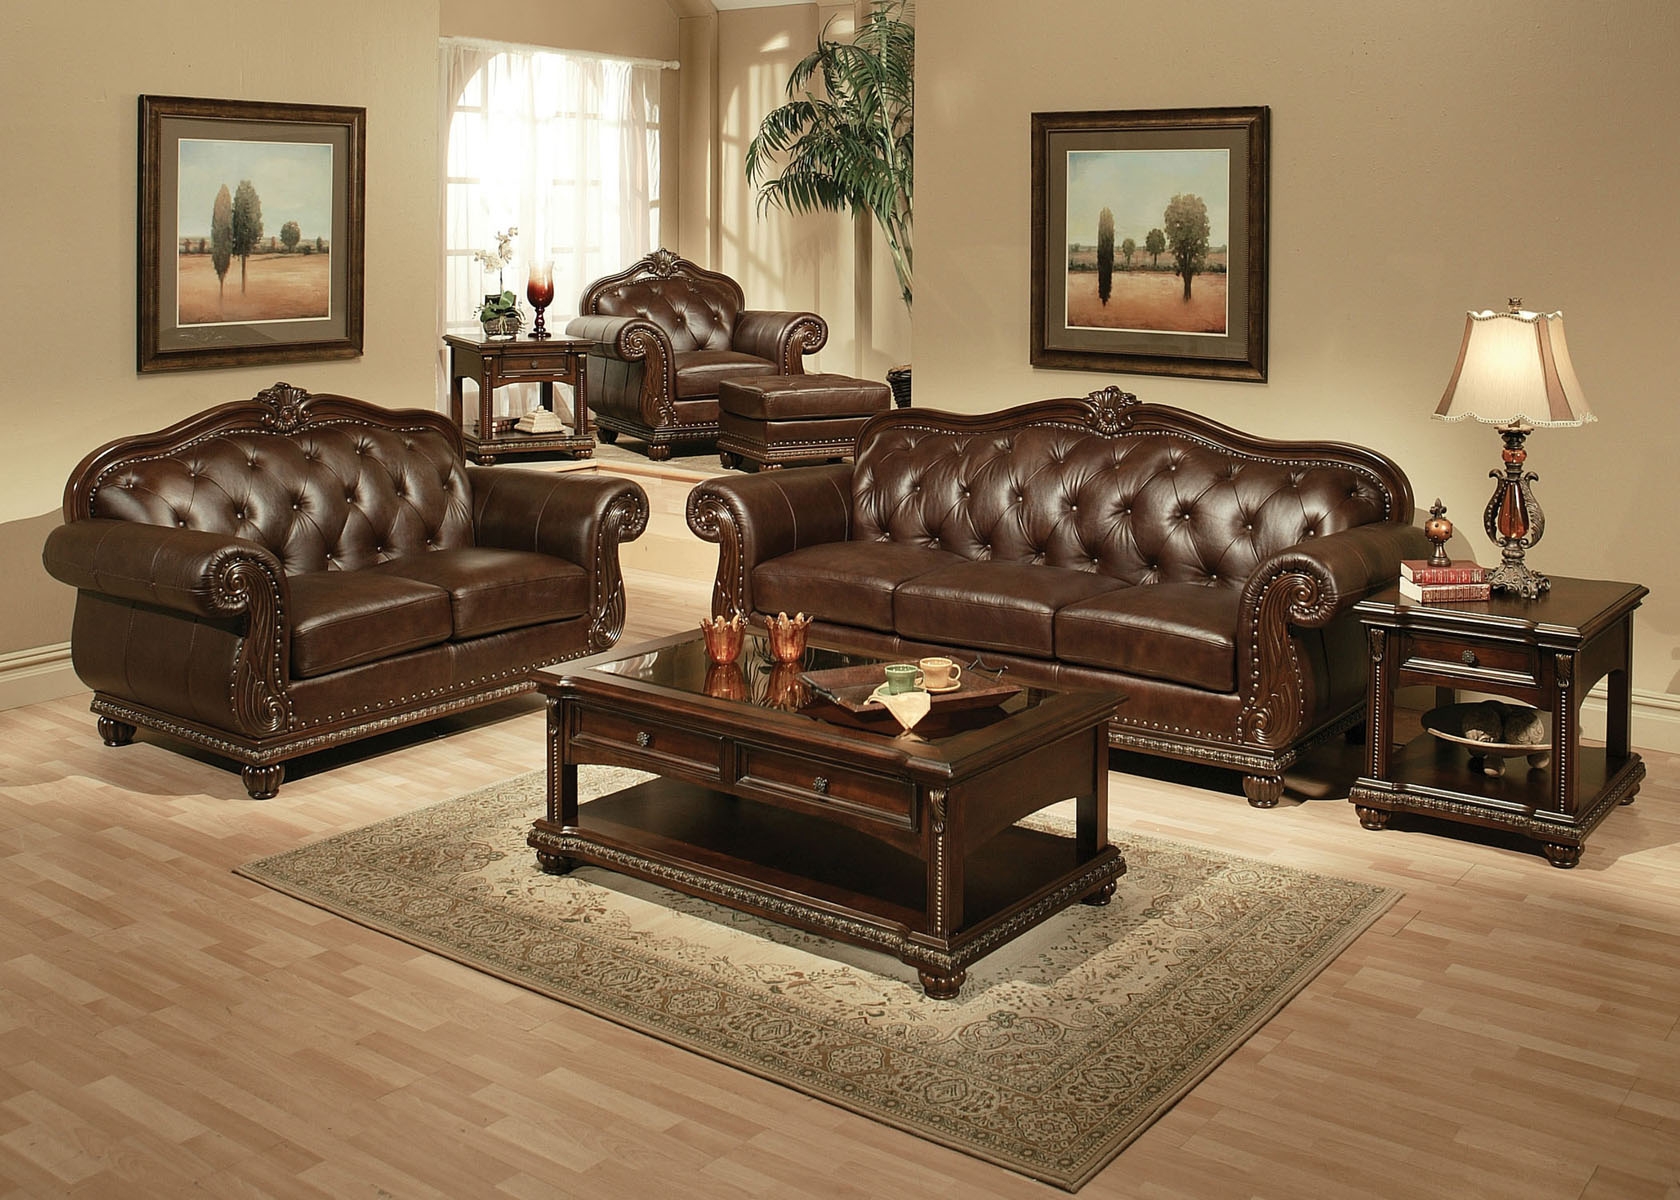 Cool Brown Tufted Leather Sofa Furniture Set With Stained Wooden Table Accessories Furniture Book Small Table Cute Lam Plant Wall Picture And Modern Wall Paint For Living Room Interior Furniture + Accessories